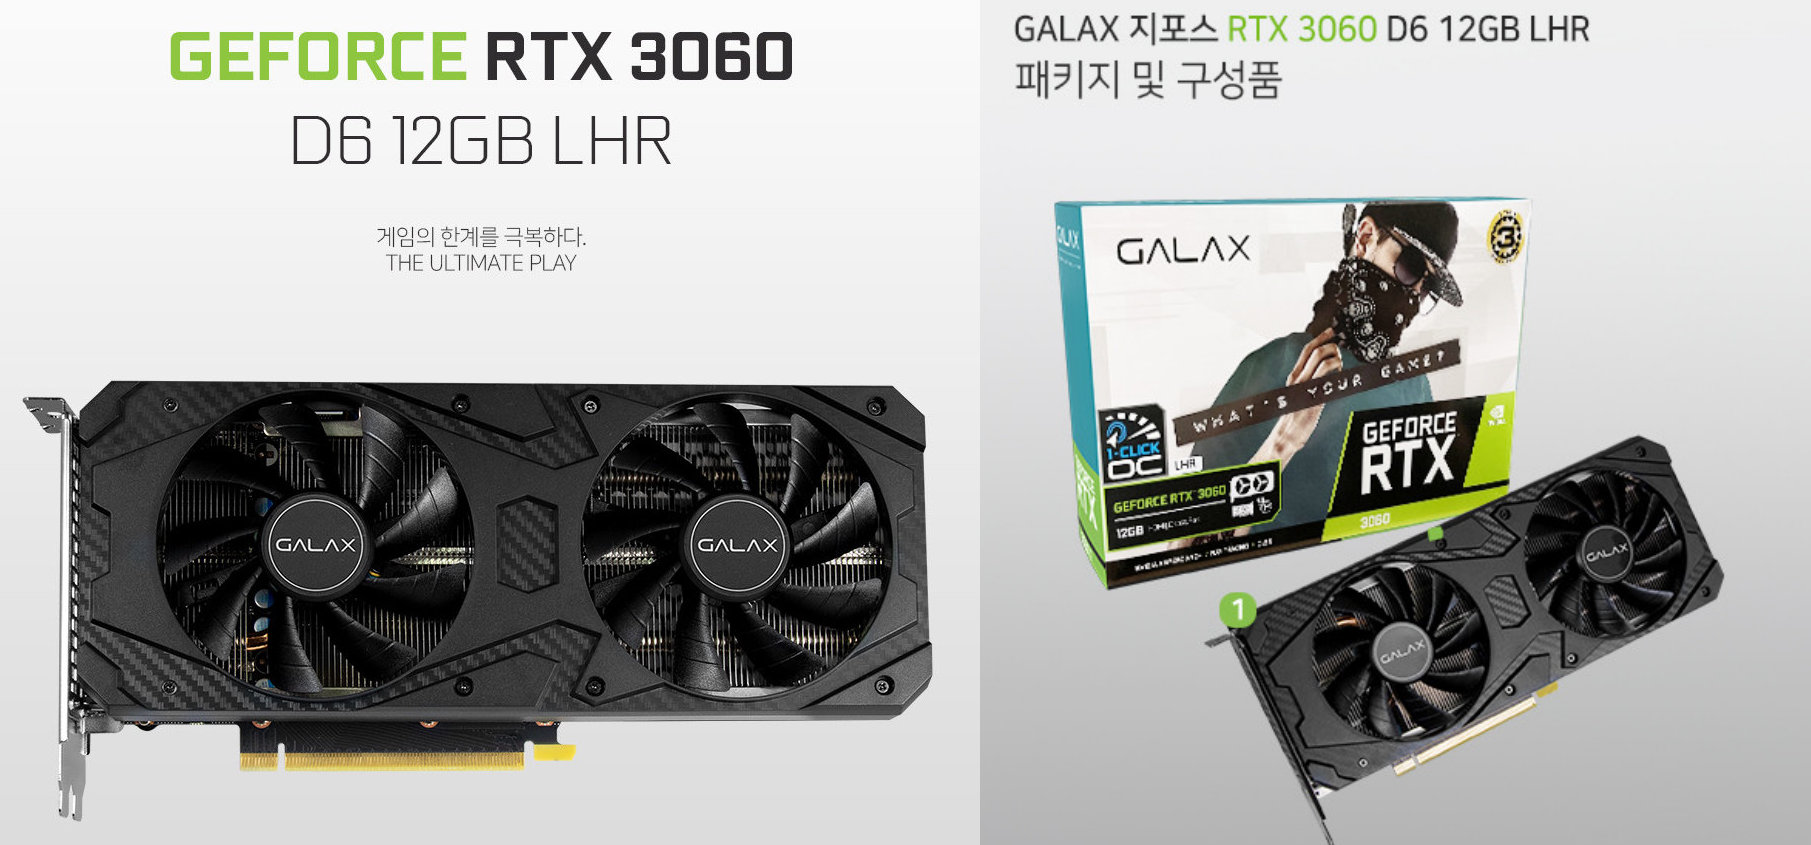 GALAX GeForce RTX 3060 LHR with GA106-302 goes on sale for 966 USD 